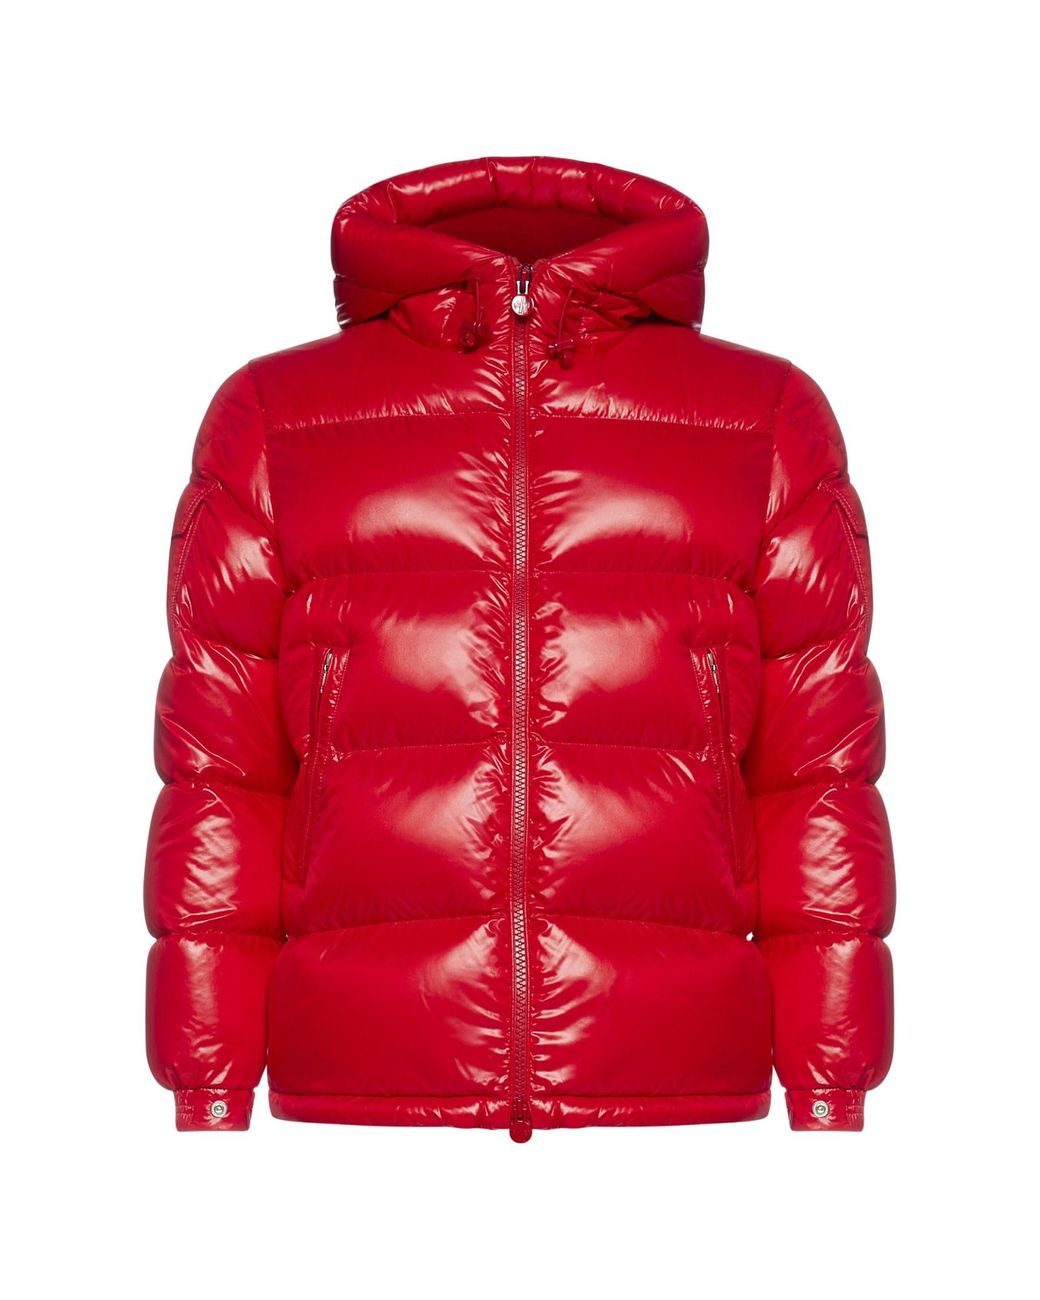 Moncler Red Jacket | Lyst